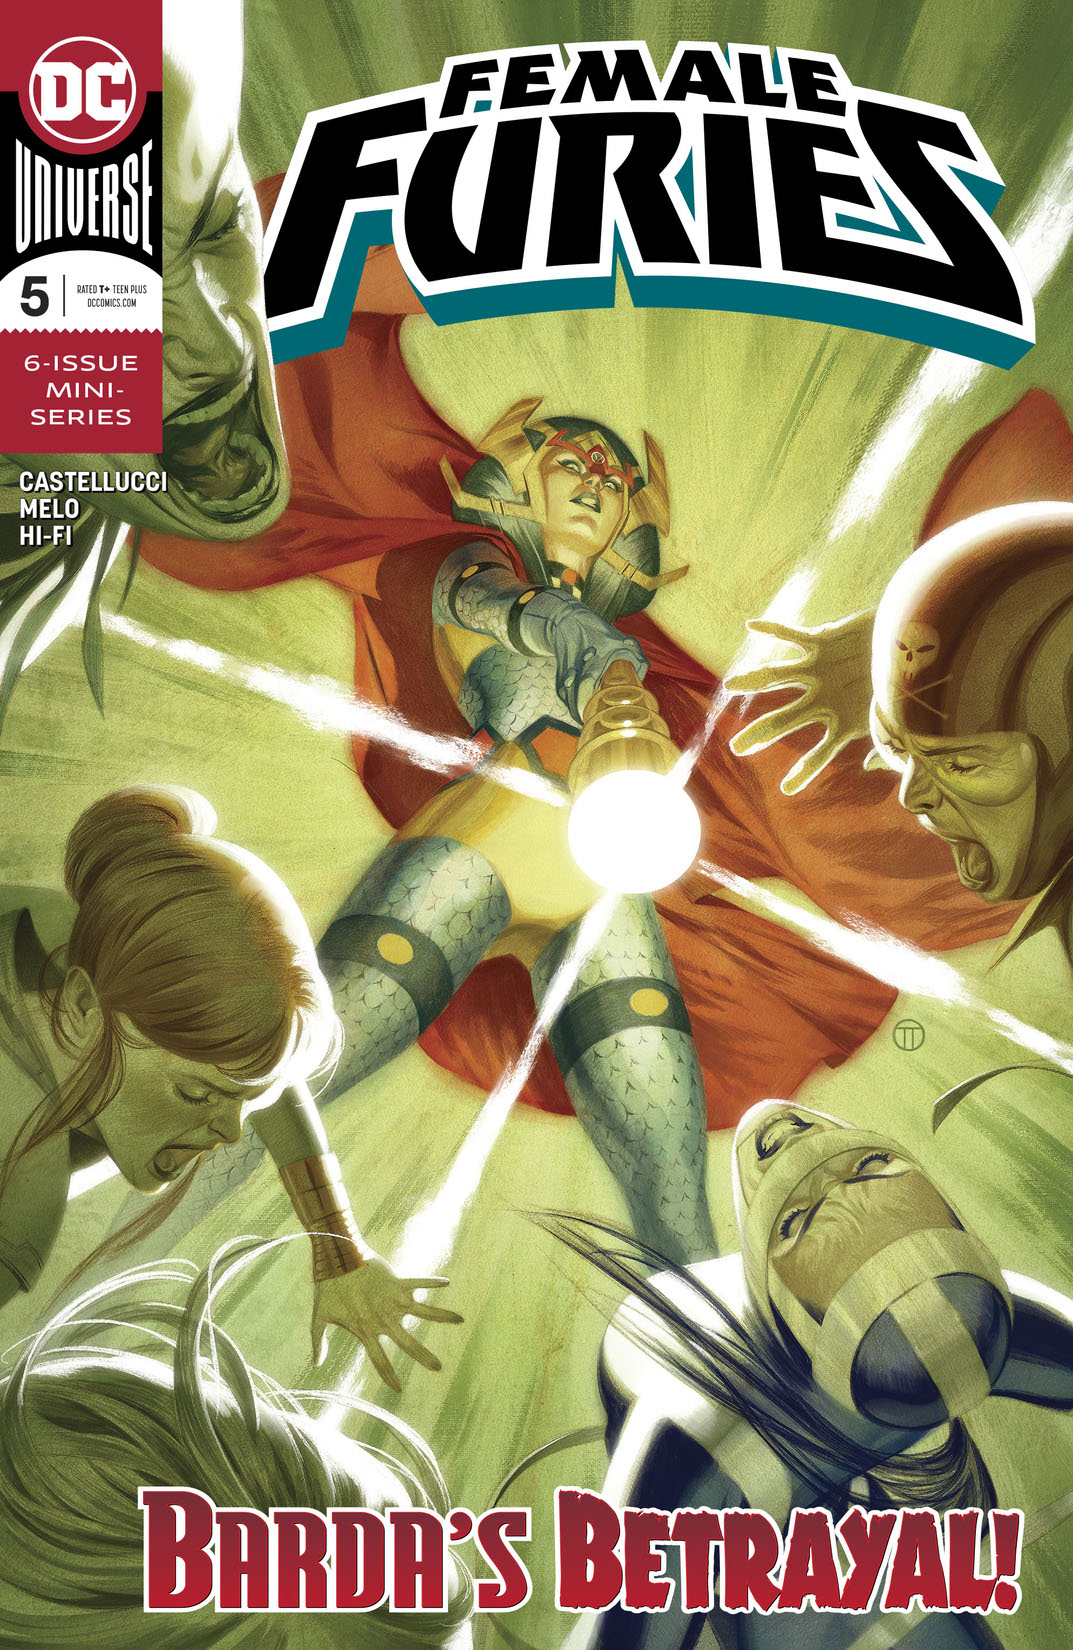 Female Furies #5 preview images